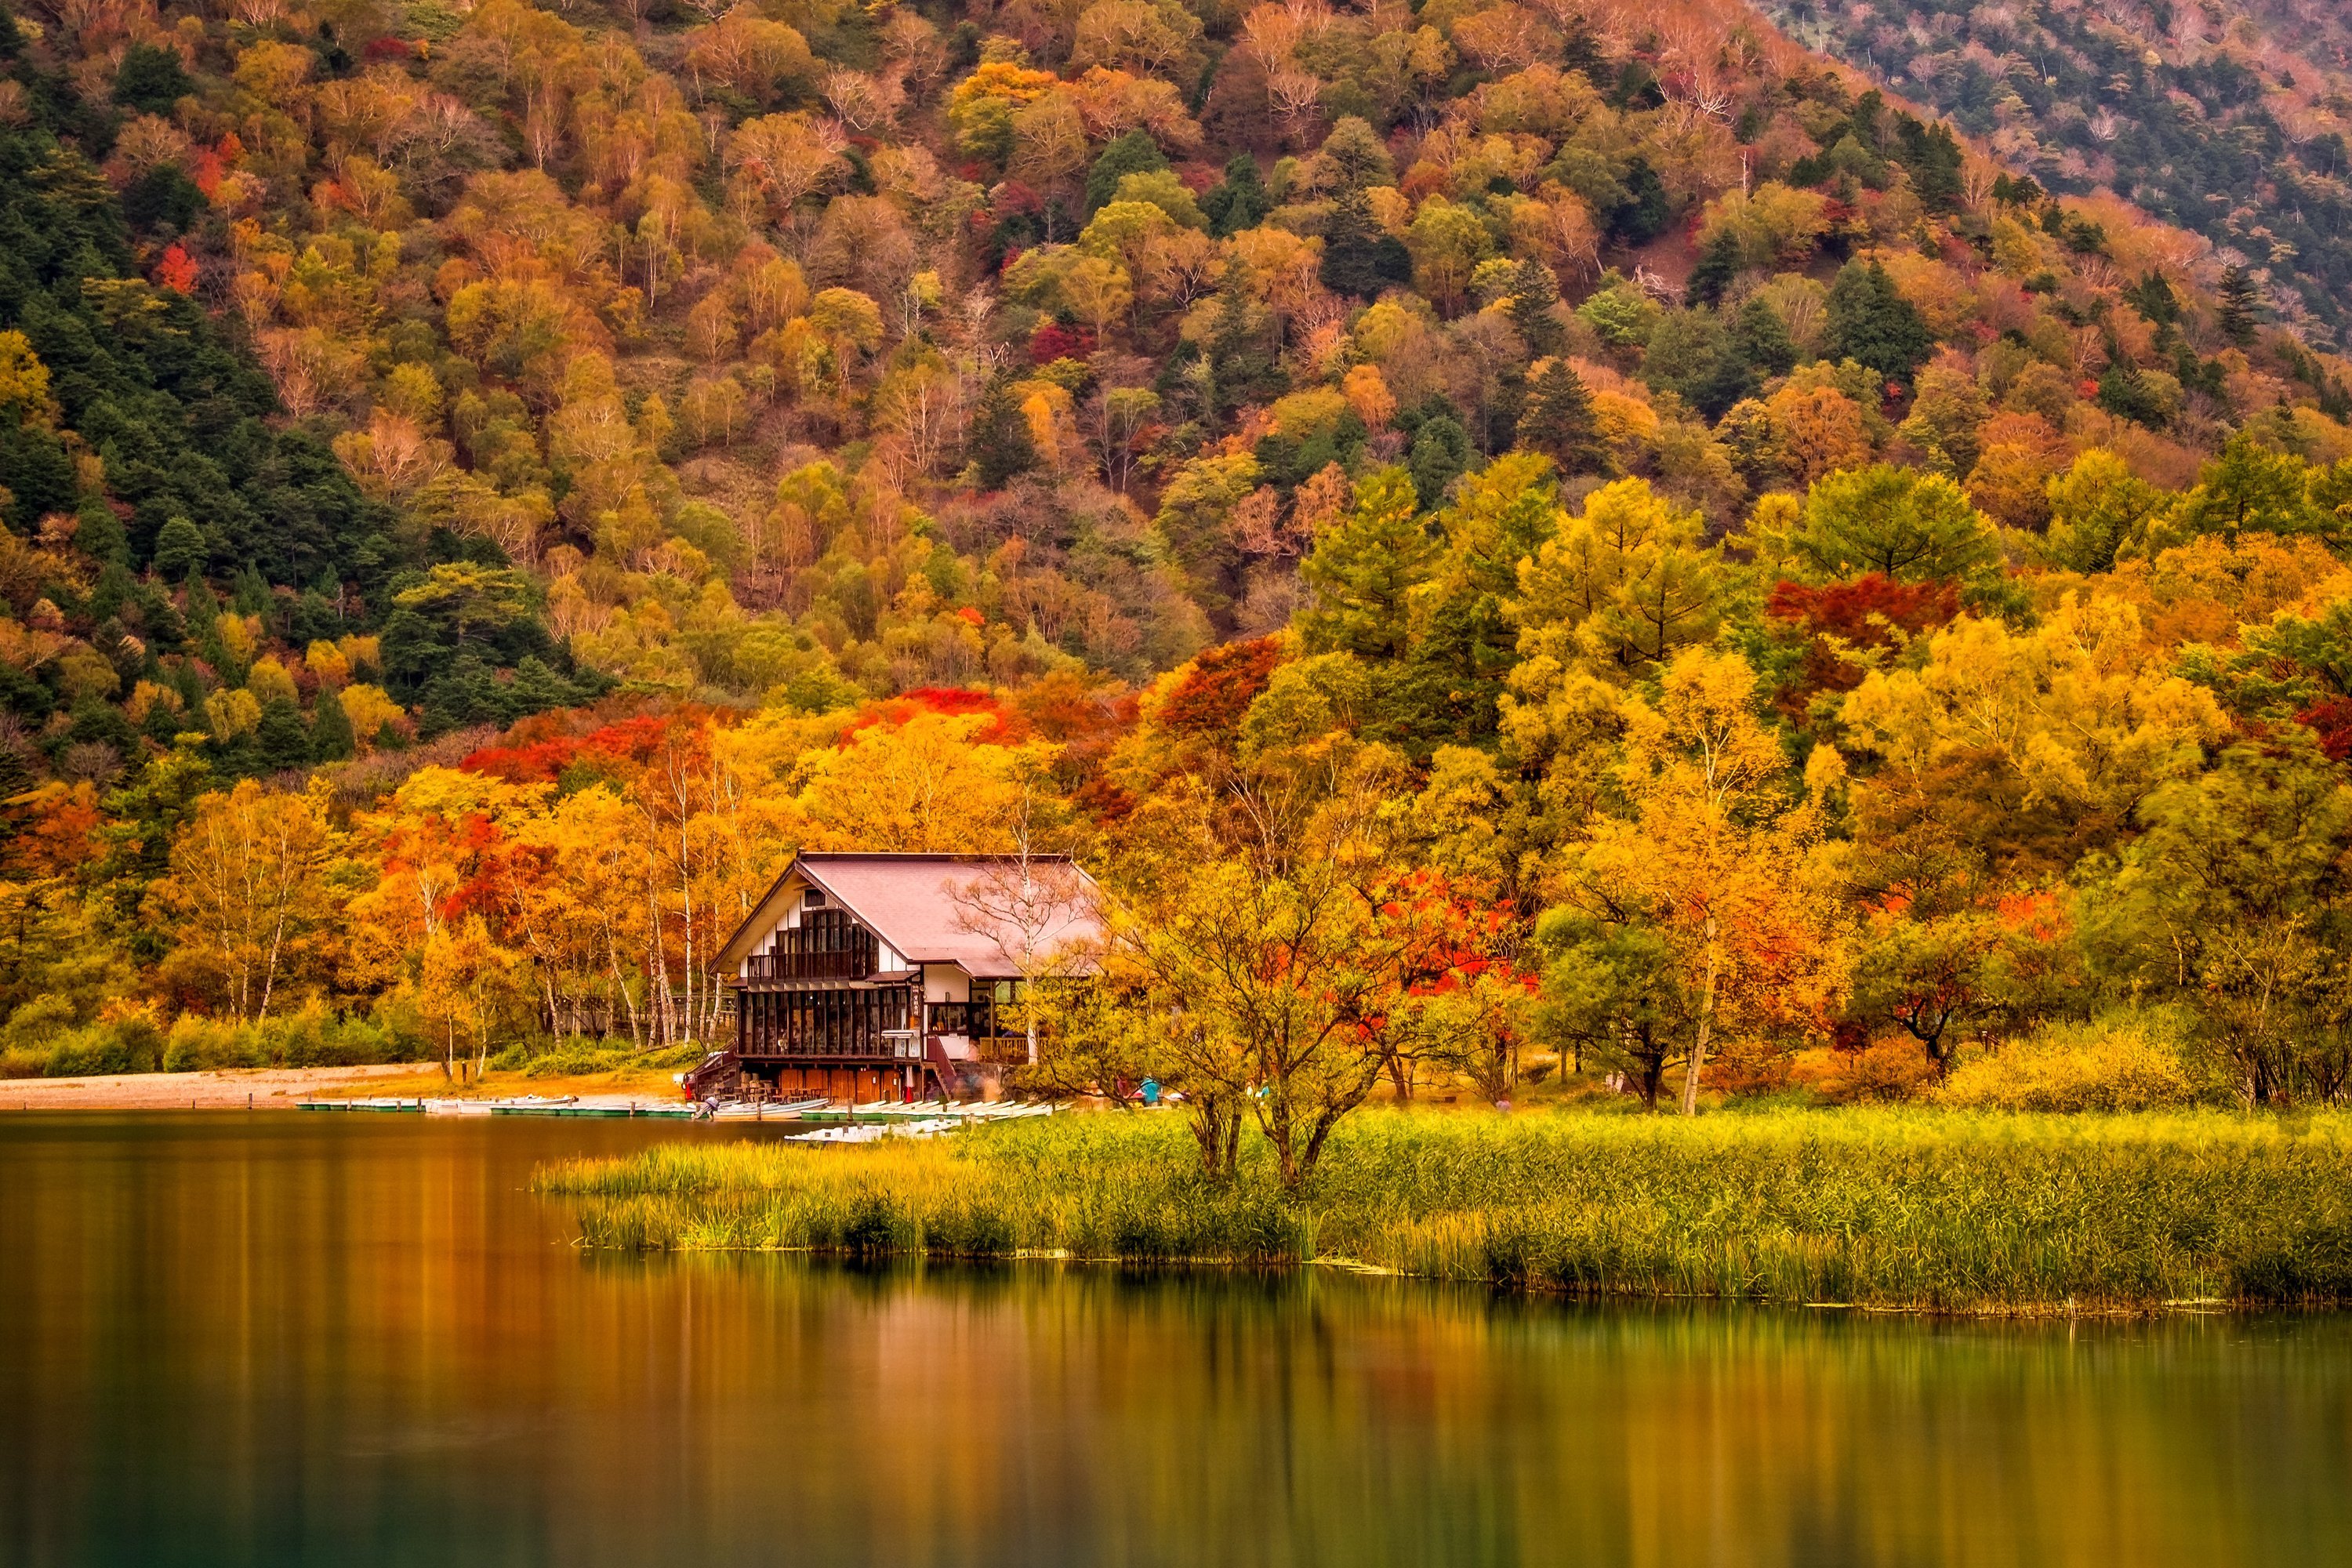 House in the Autumn Forest HD Wallpaper